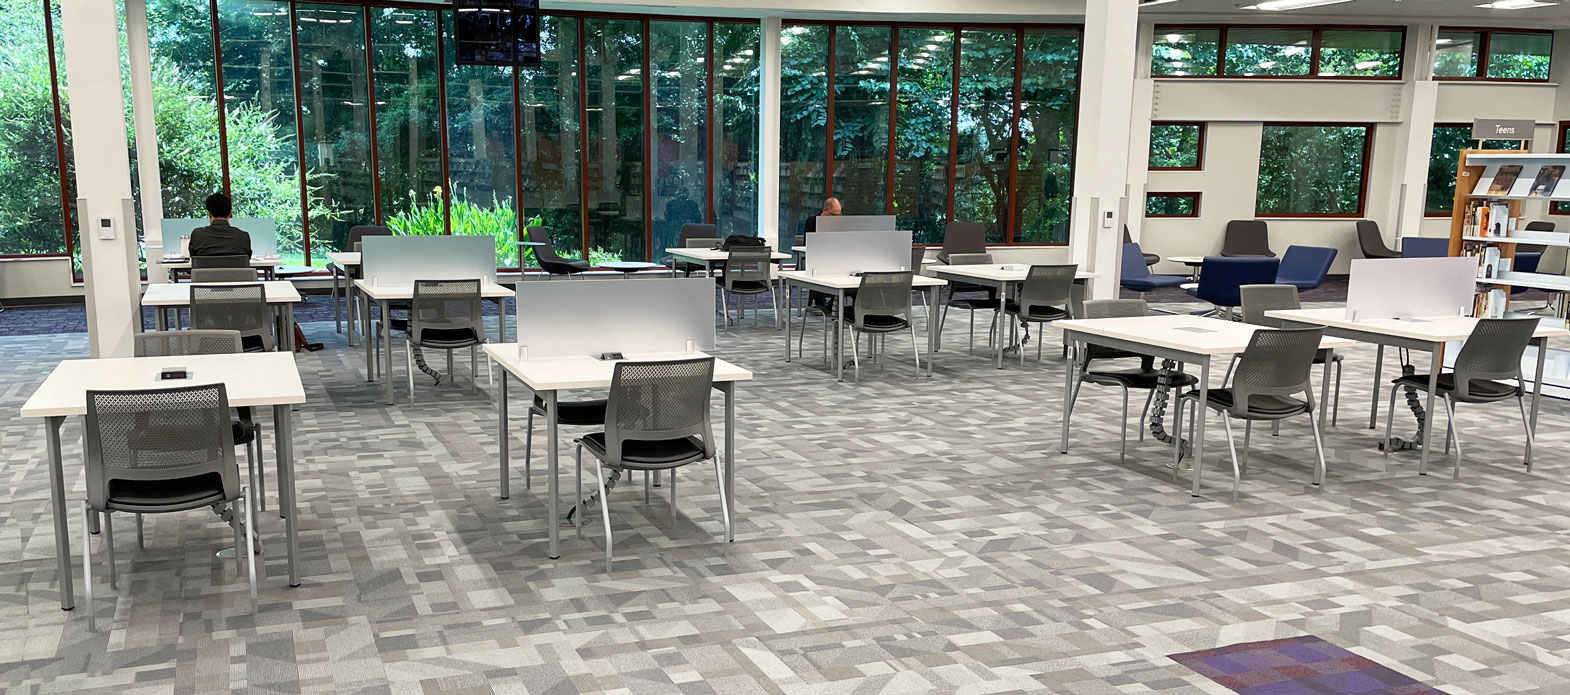 Roland Study Tables - Atlanta Public with integrated table and access to power